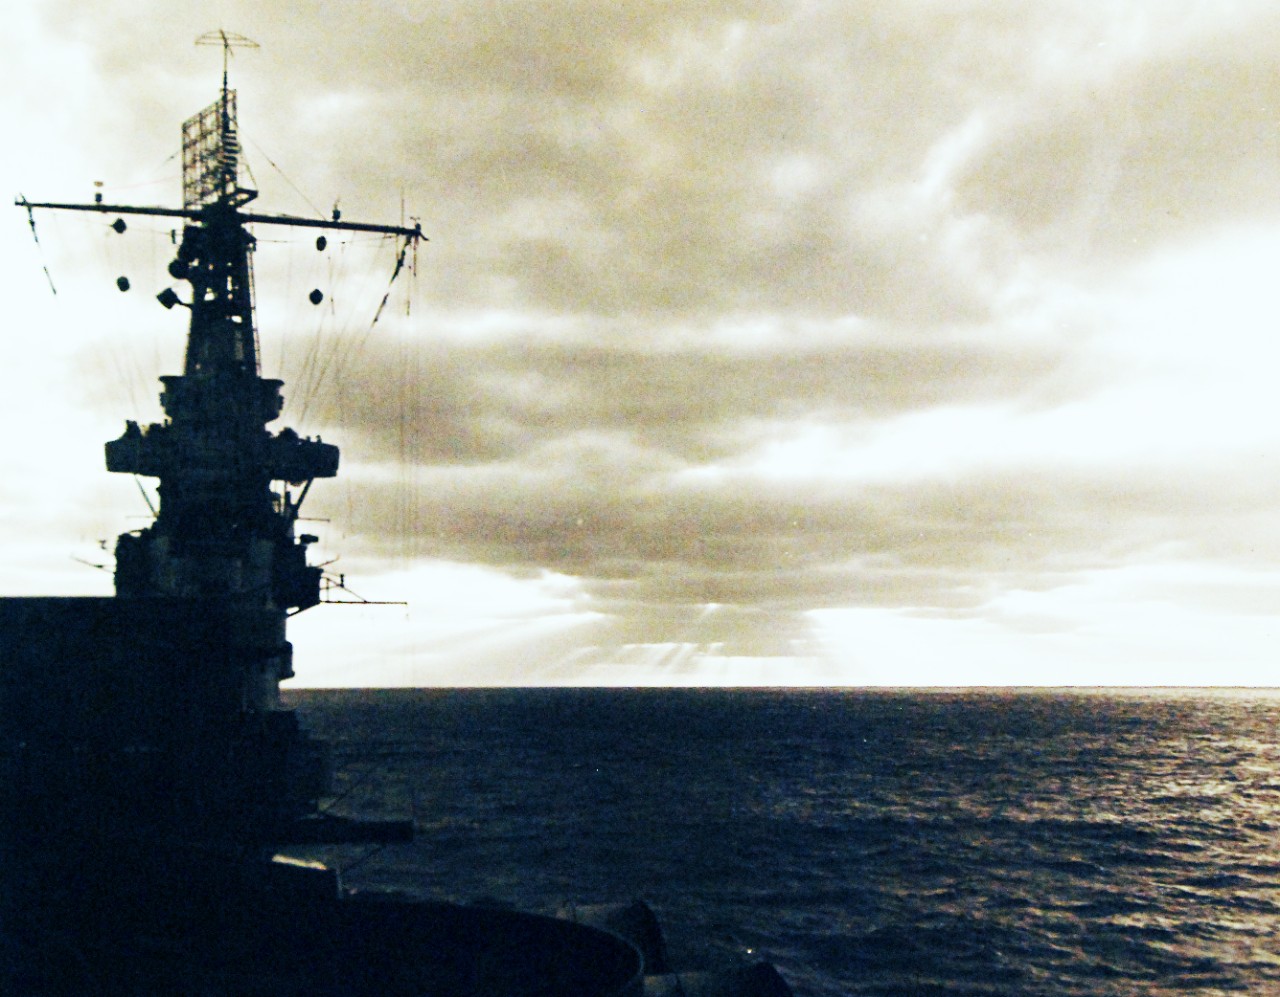 80-G-22059: USS Ranger  (CV-4), 1942.     Sunrise on high seas as viewed from USS Ranger (CV-4).  Photograph released August 31, 1942.  Official U.S. Navy photograph, now in the collections of the National Archives.  (2016/09/20).